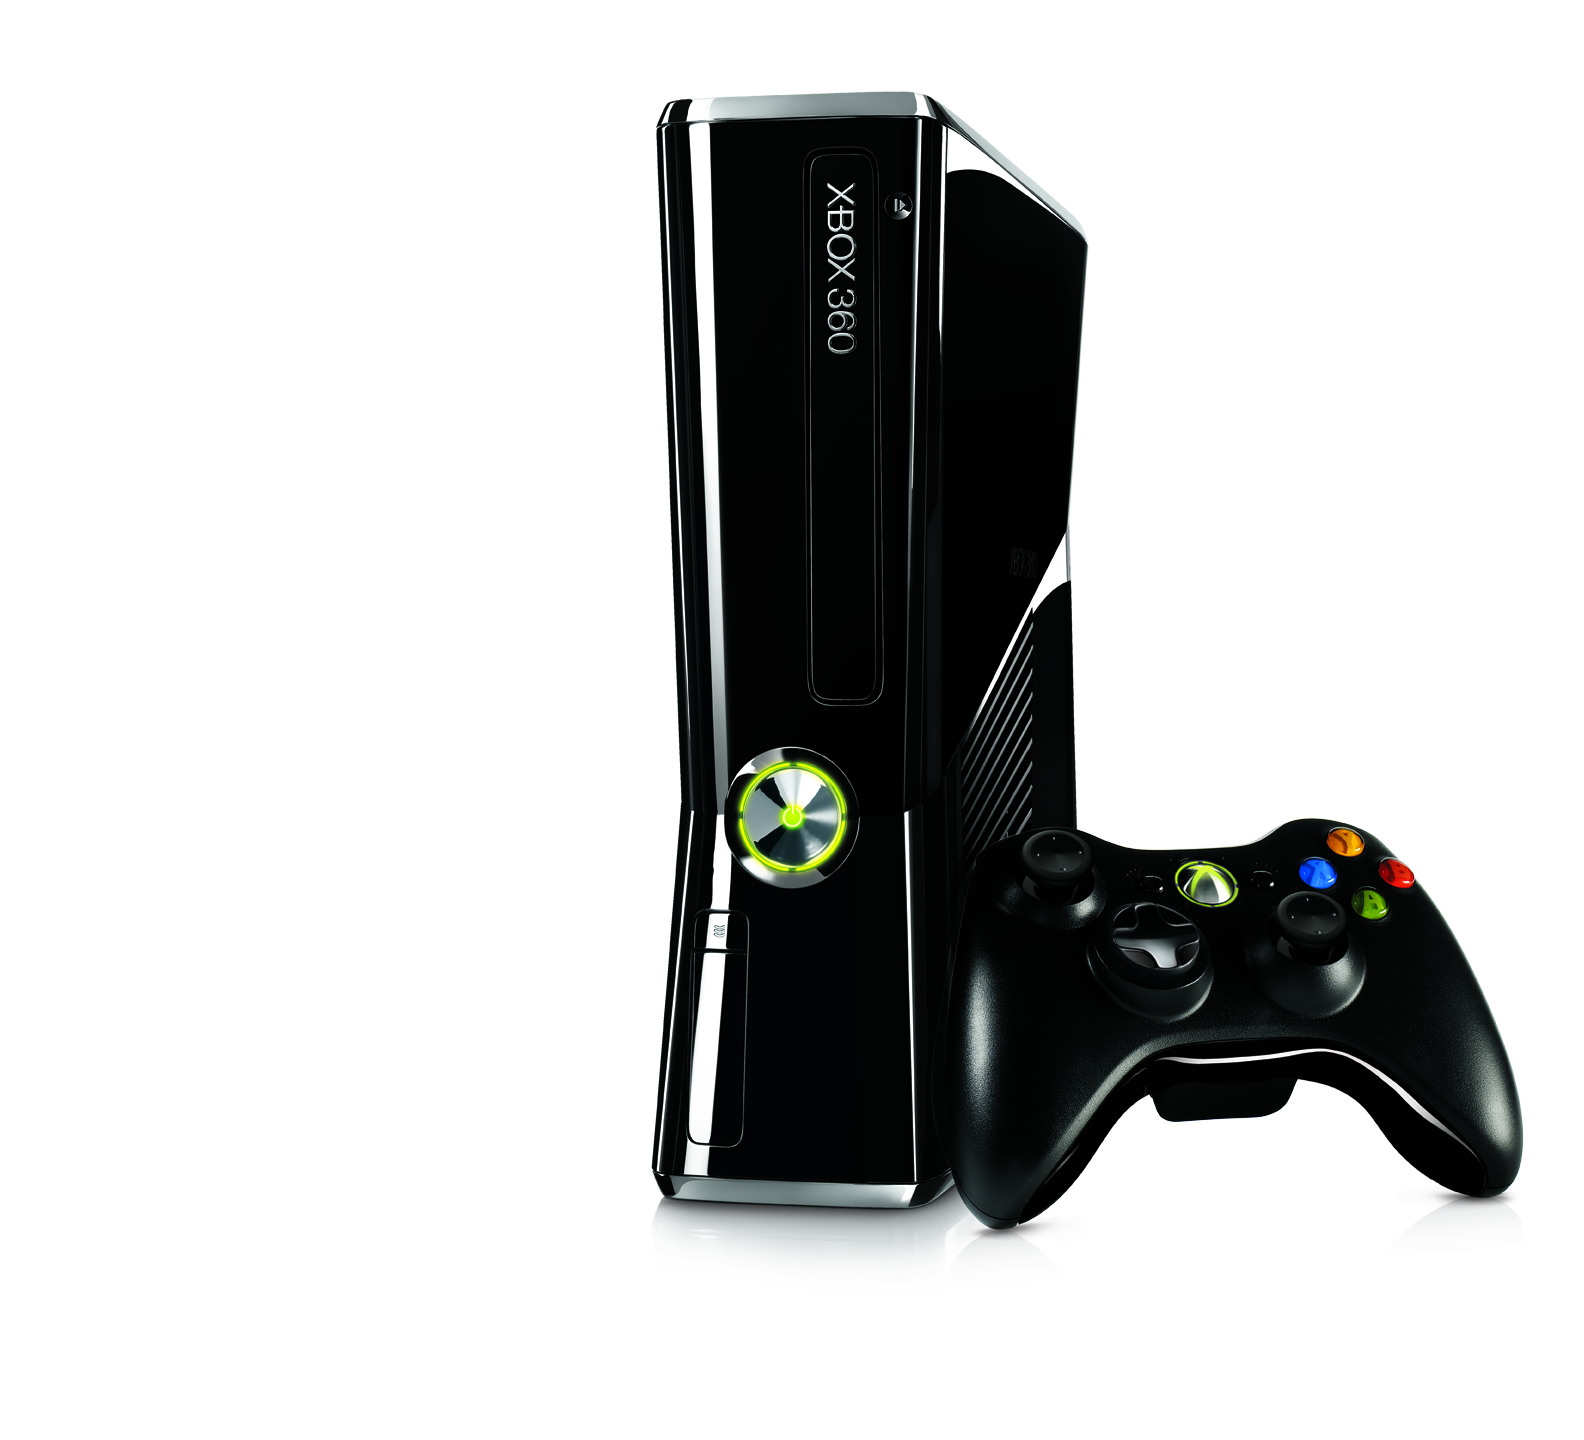  wallpapers and Gadgetsxbox We post tecnology wallpapers and news on